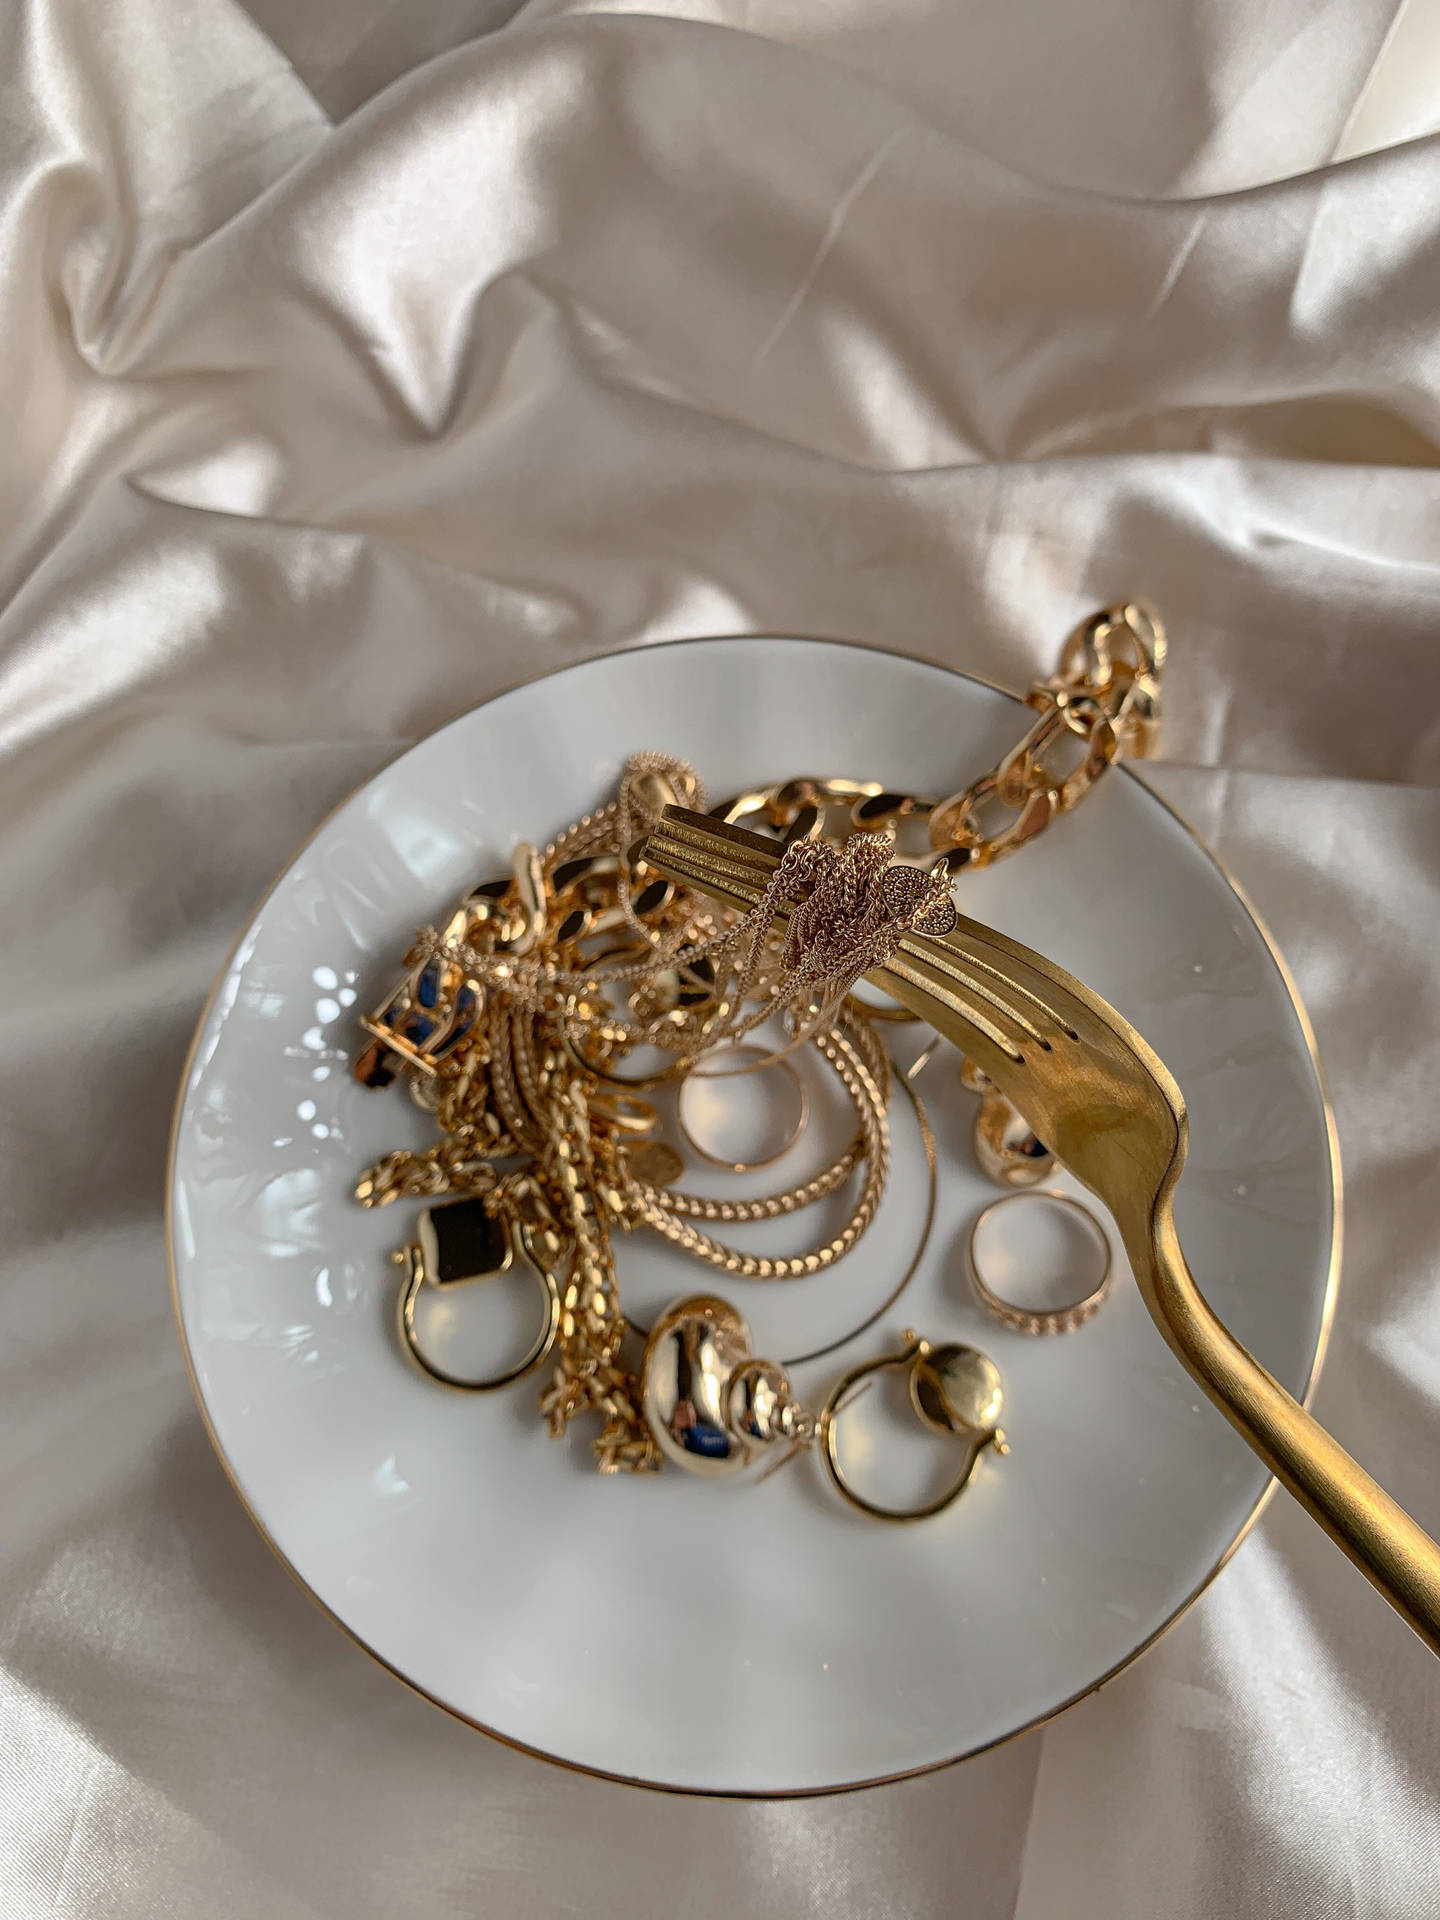 Gold Jewellery On A Plate Wallpaper